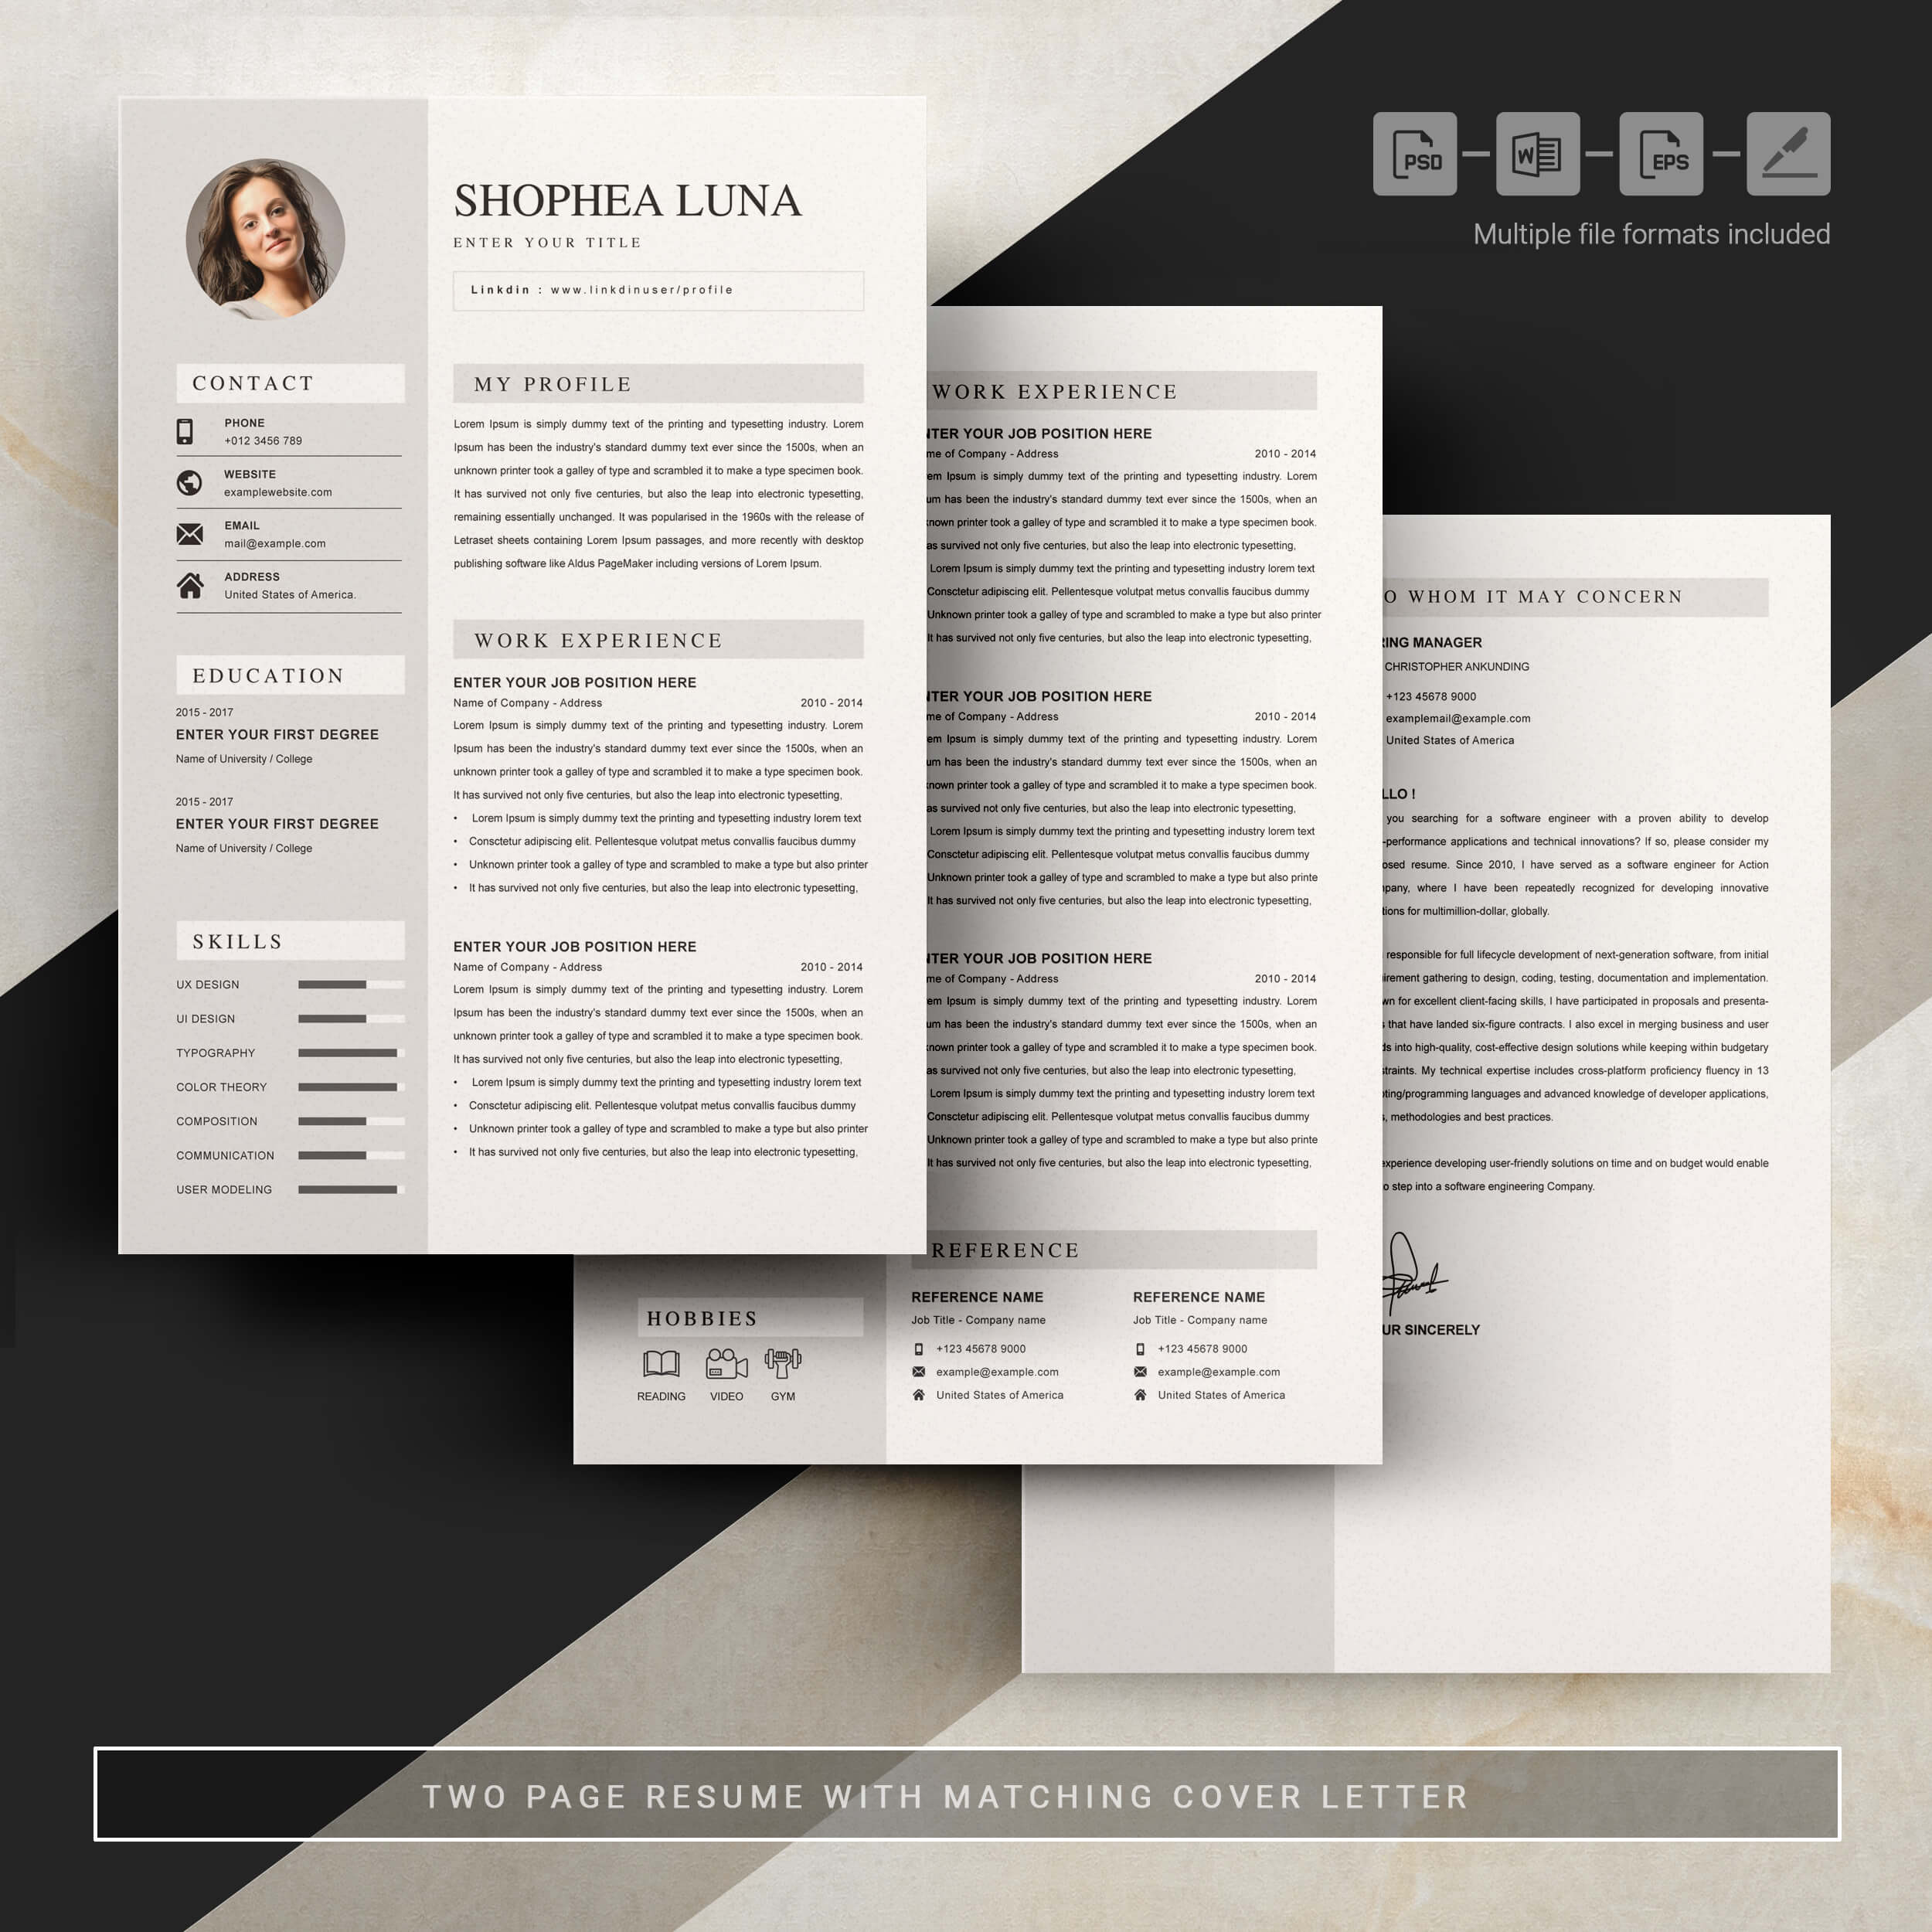 05 3 pages free resume design template 935